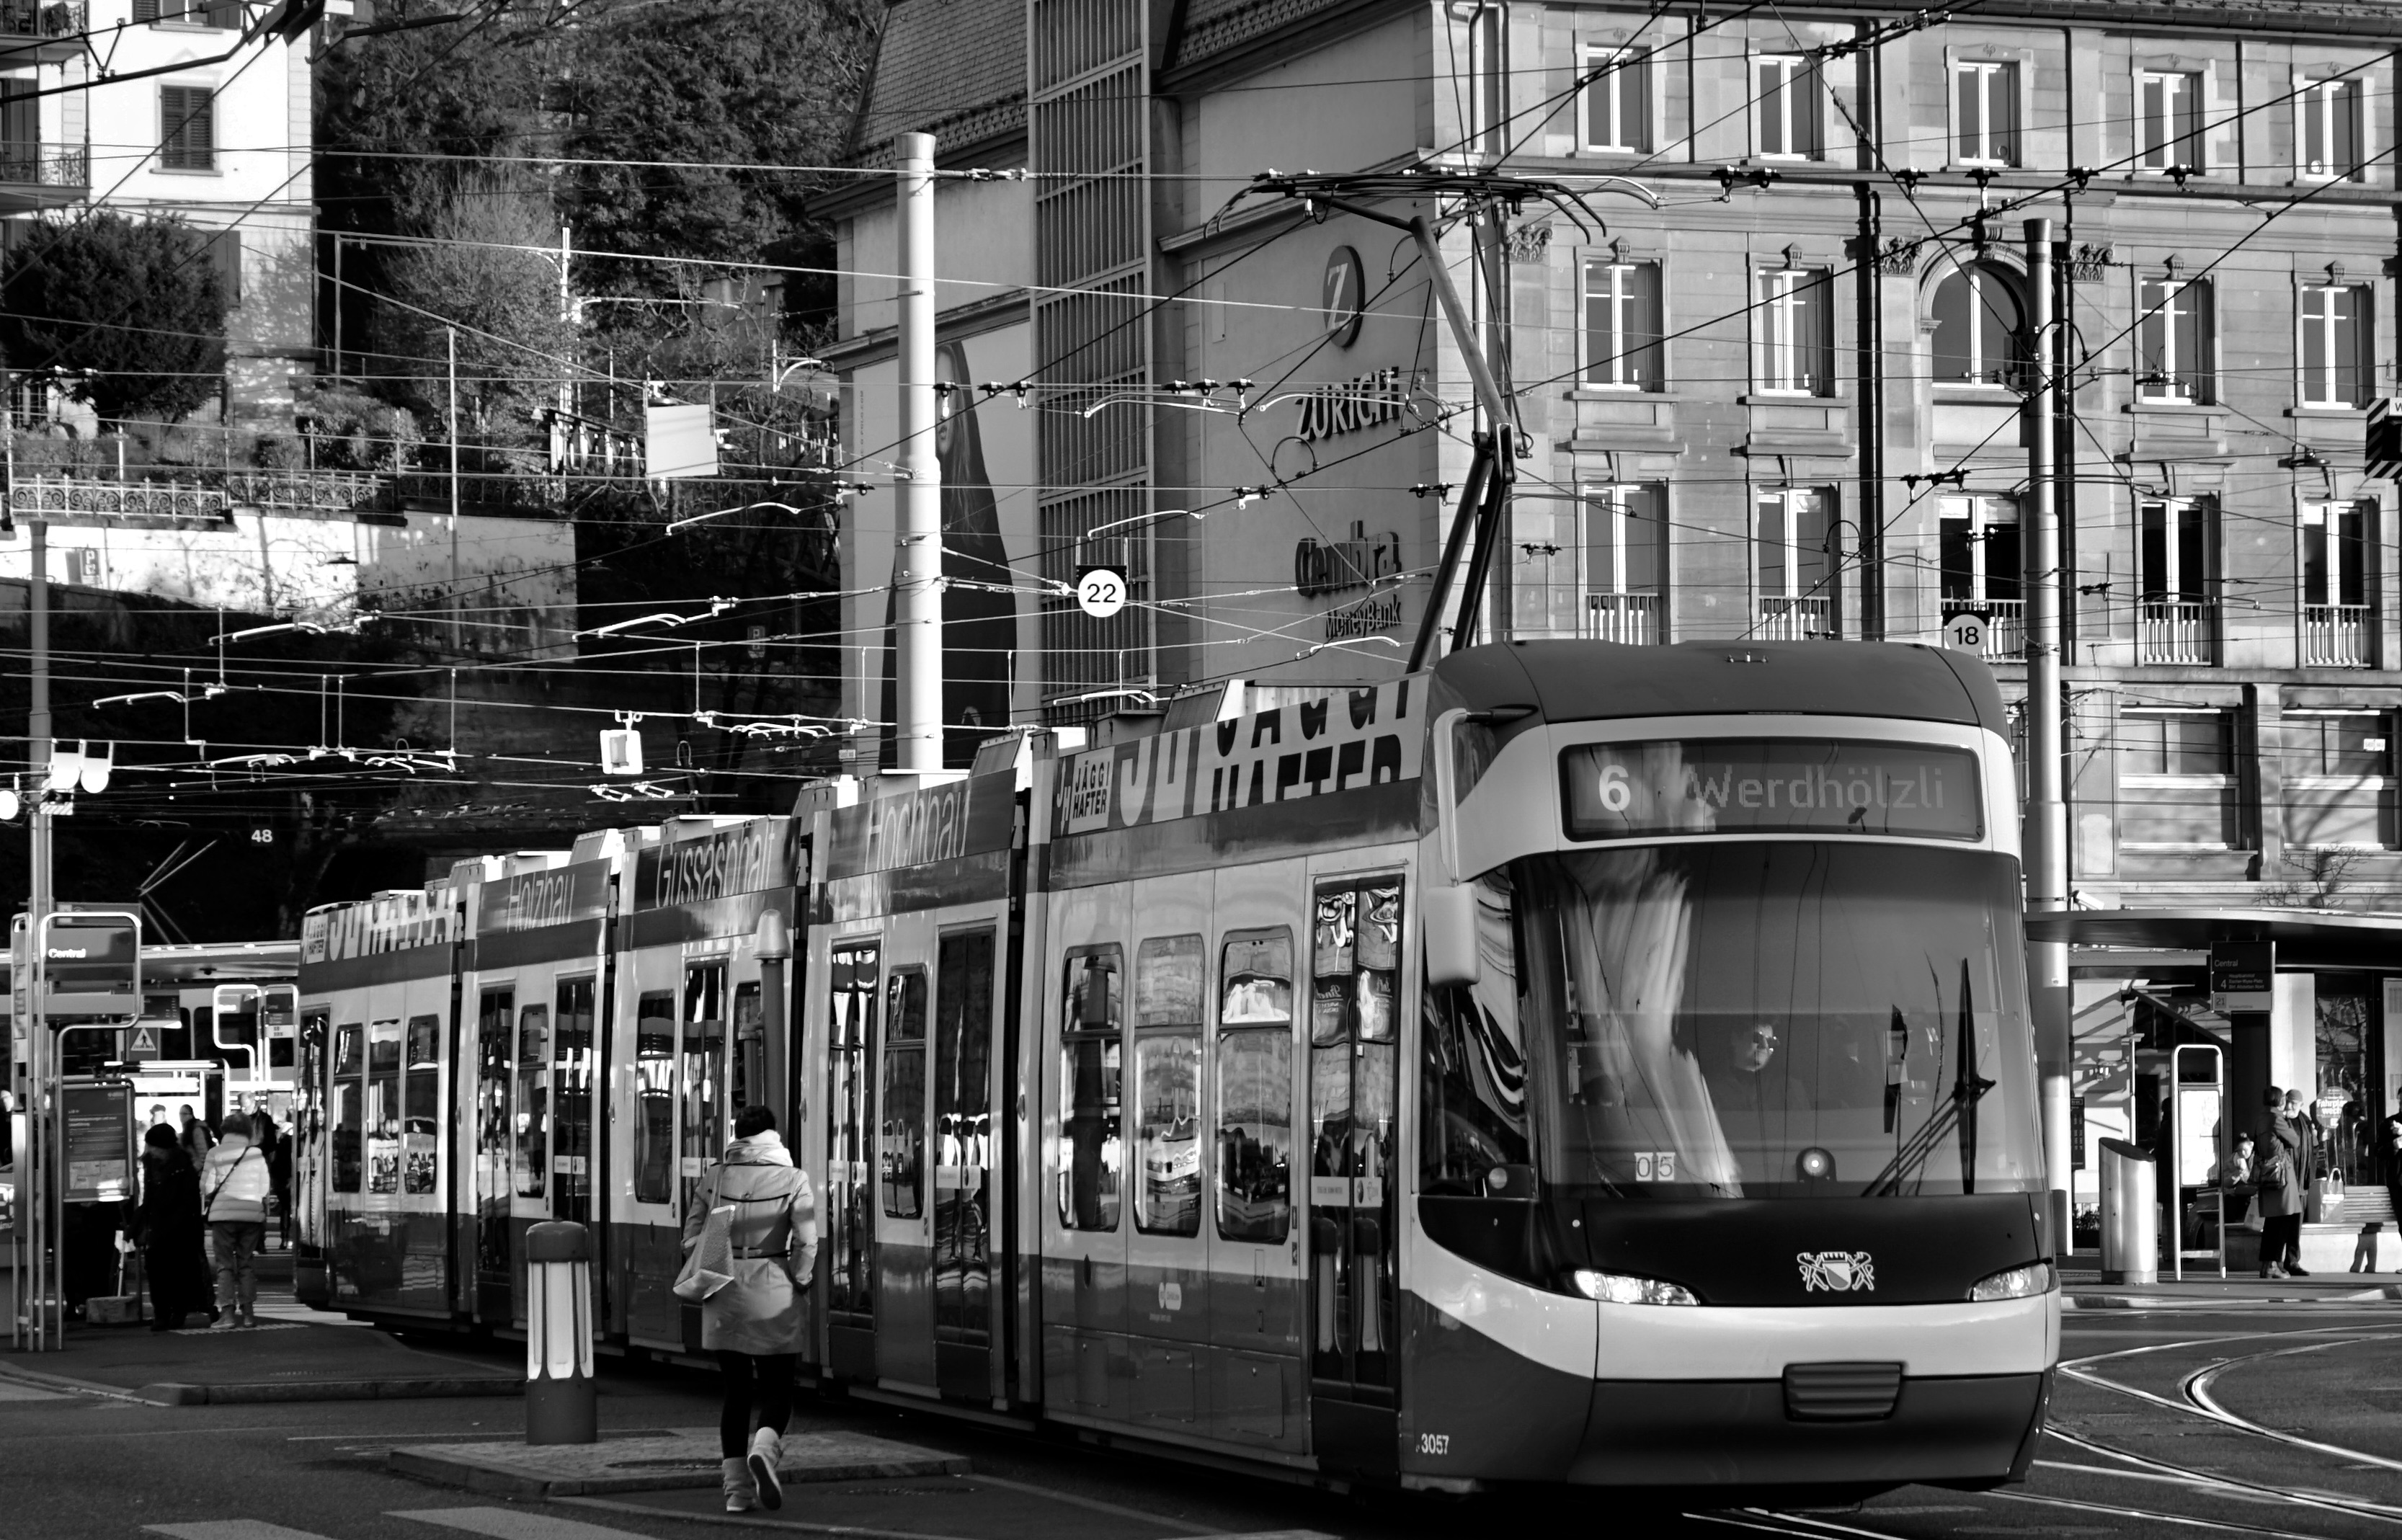 A number 6 tram in Zurich in black and white.